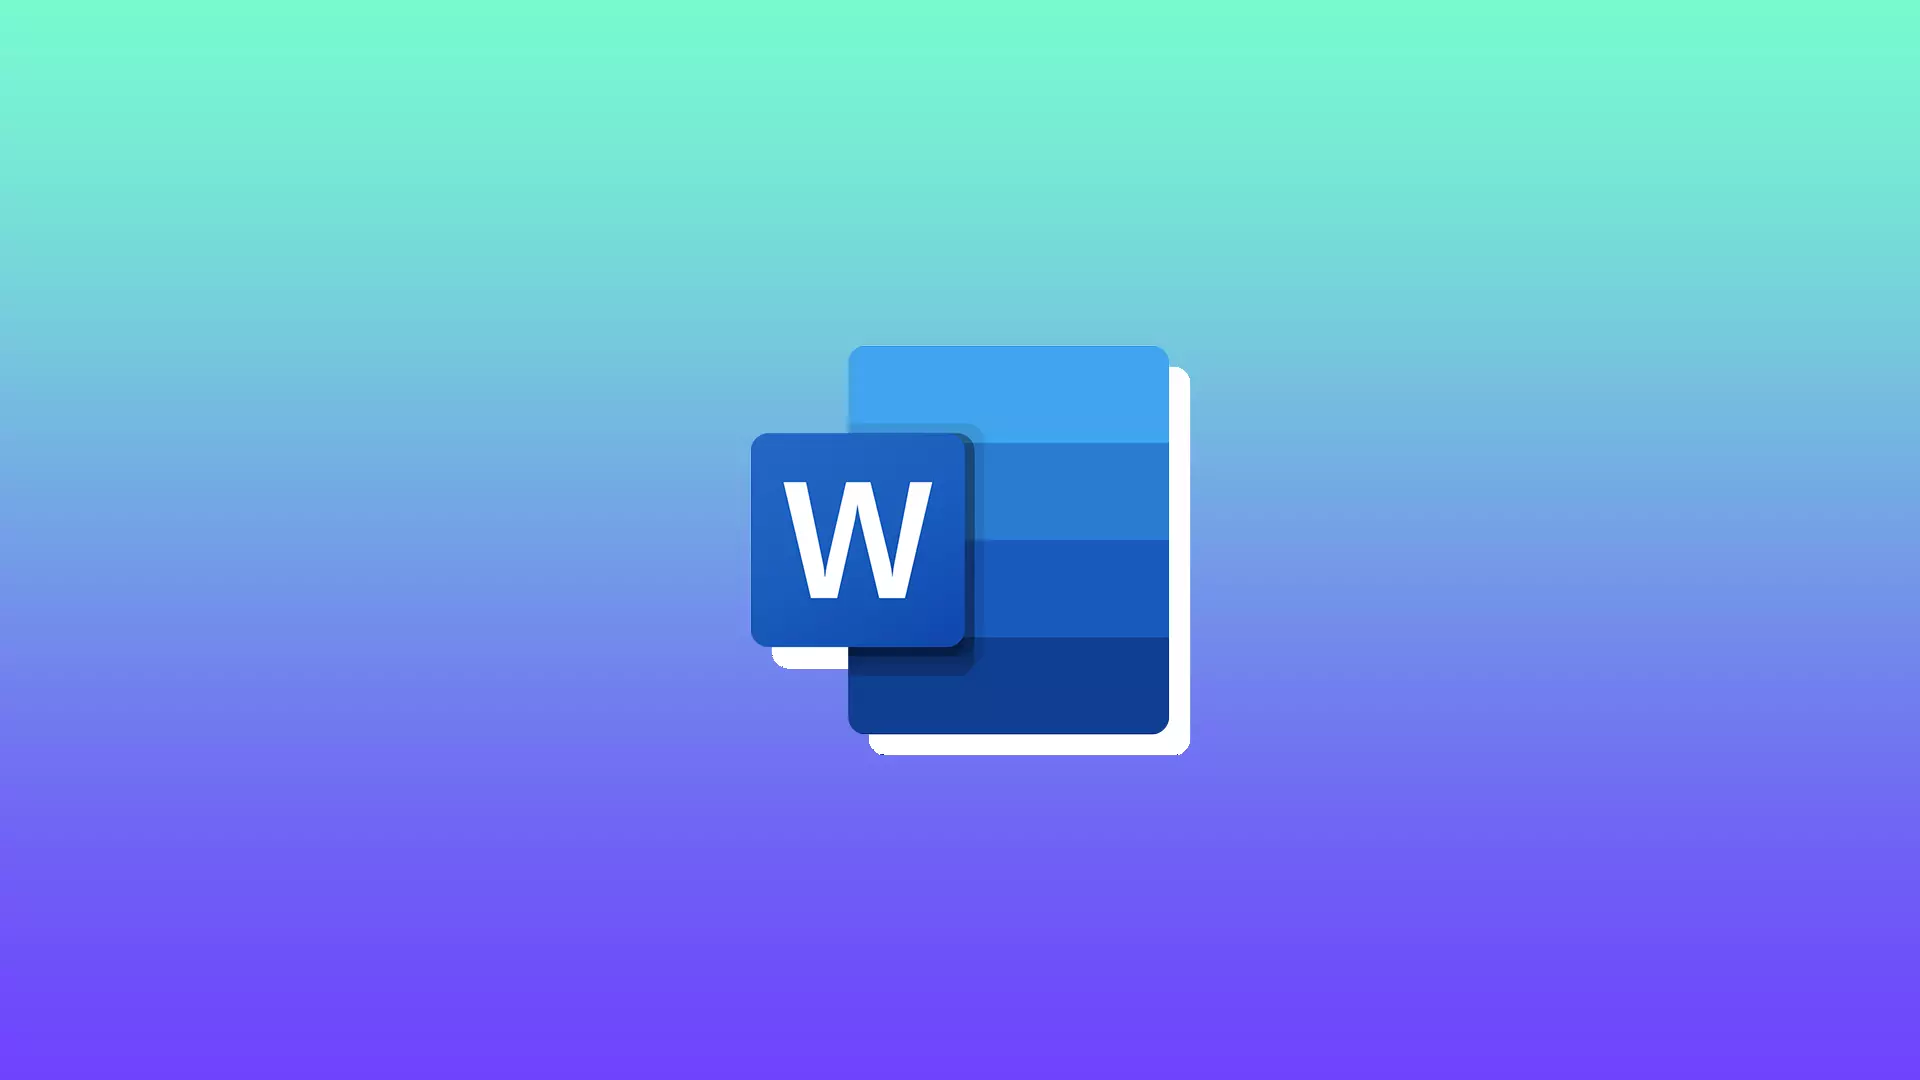 How to use strikethrough shortcuts in Microsoft Word